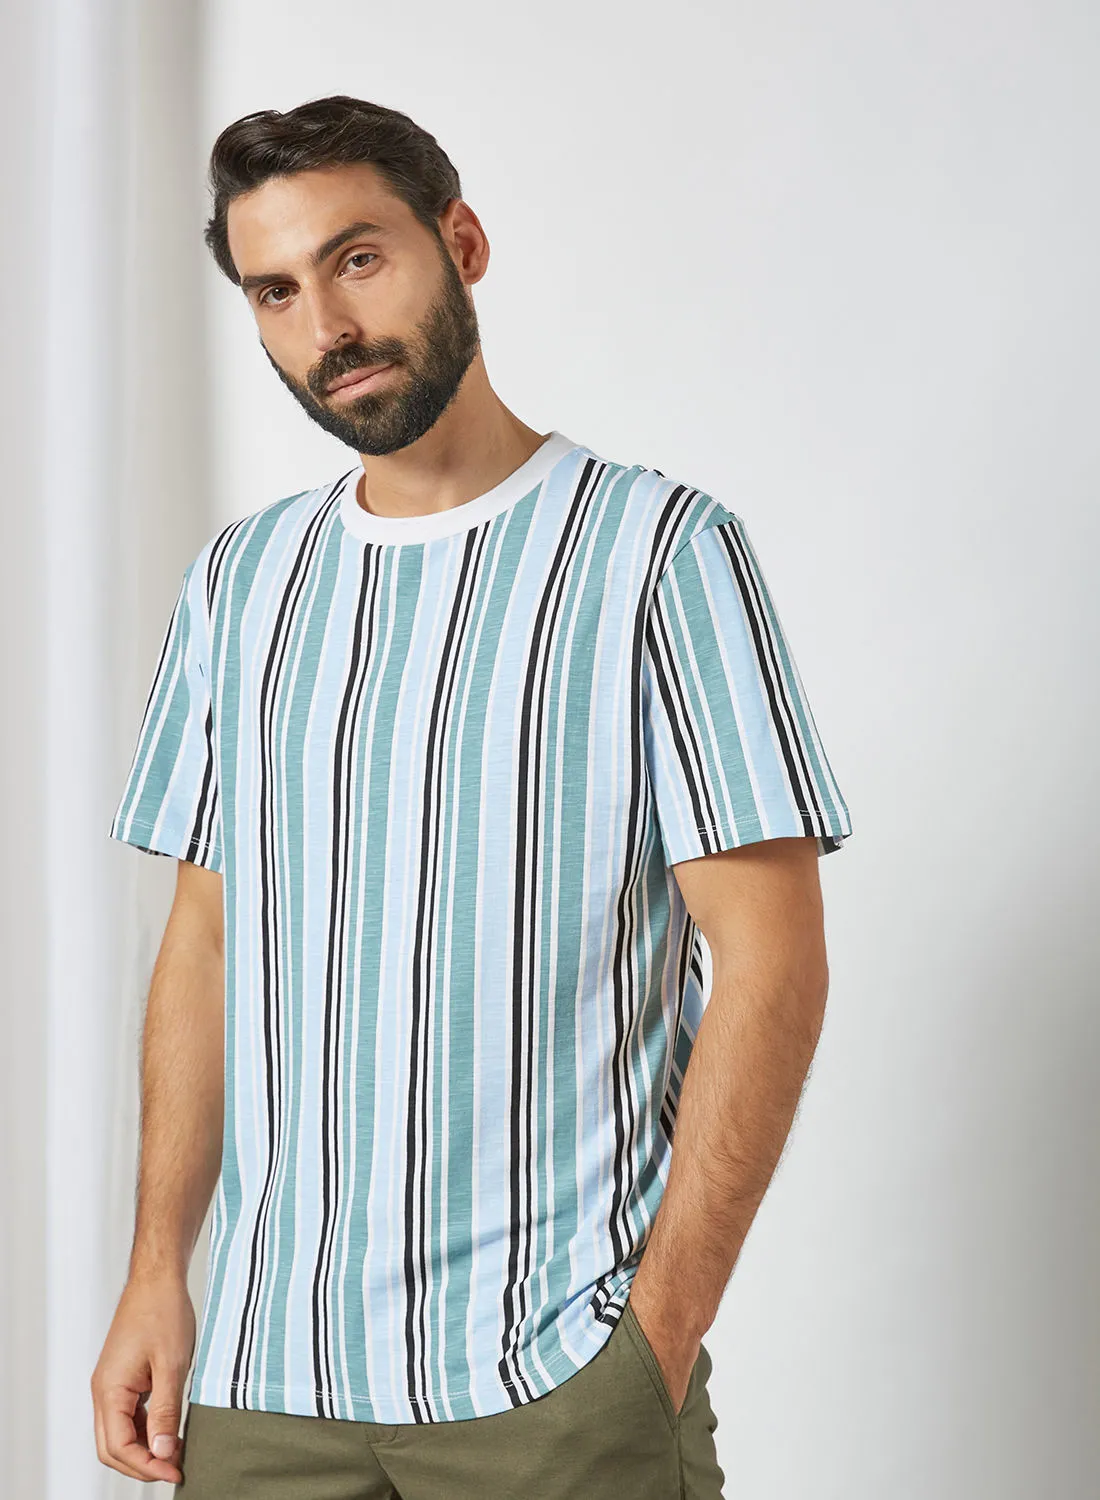 STATE 8 All-Over Stripe T-Shirt Blue/Grey Stripes